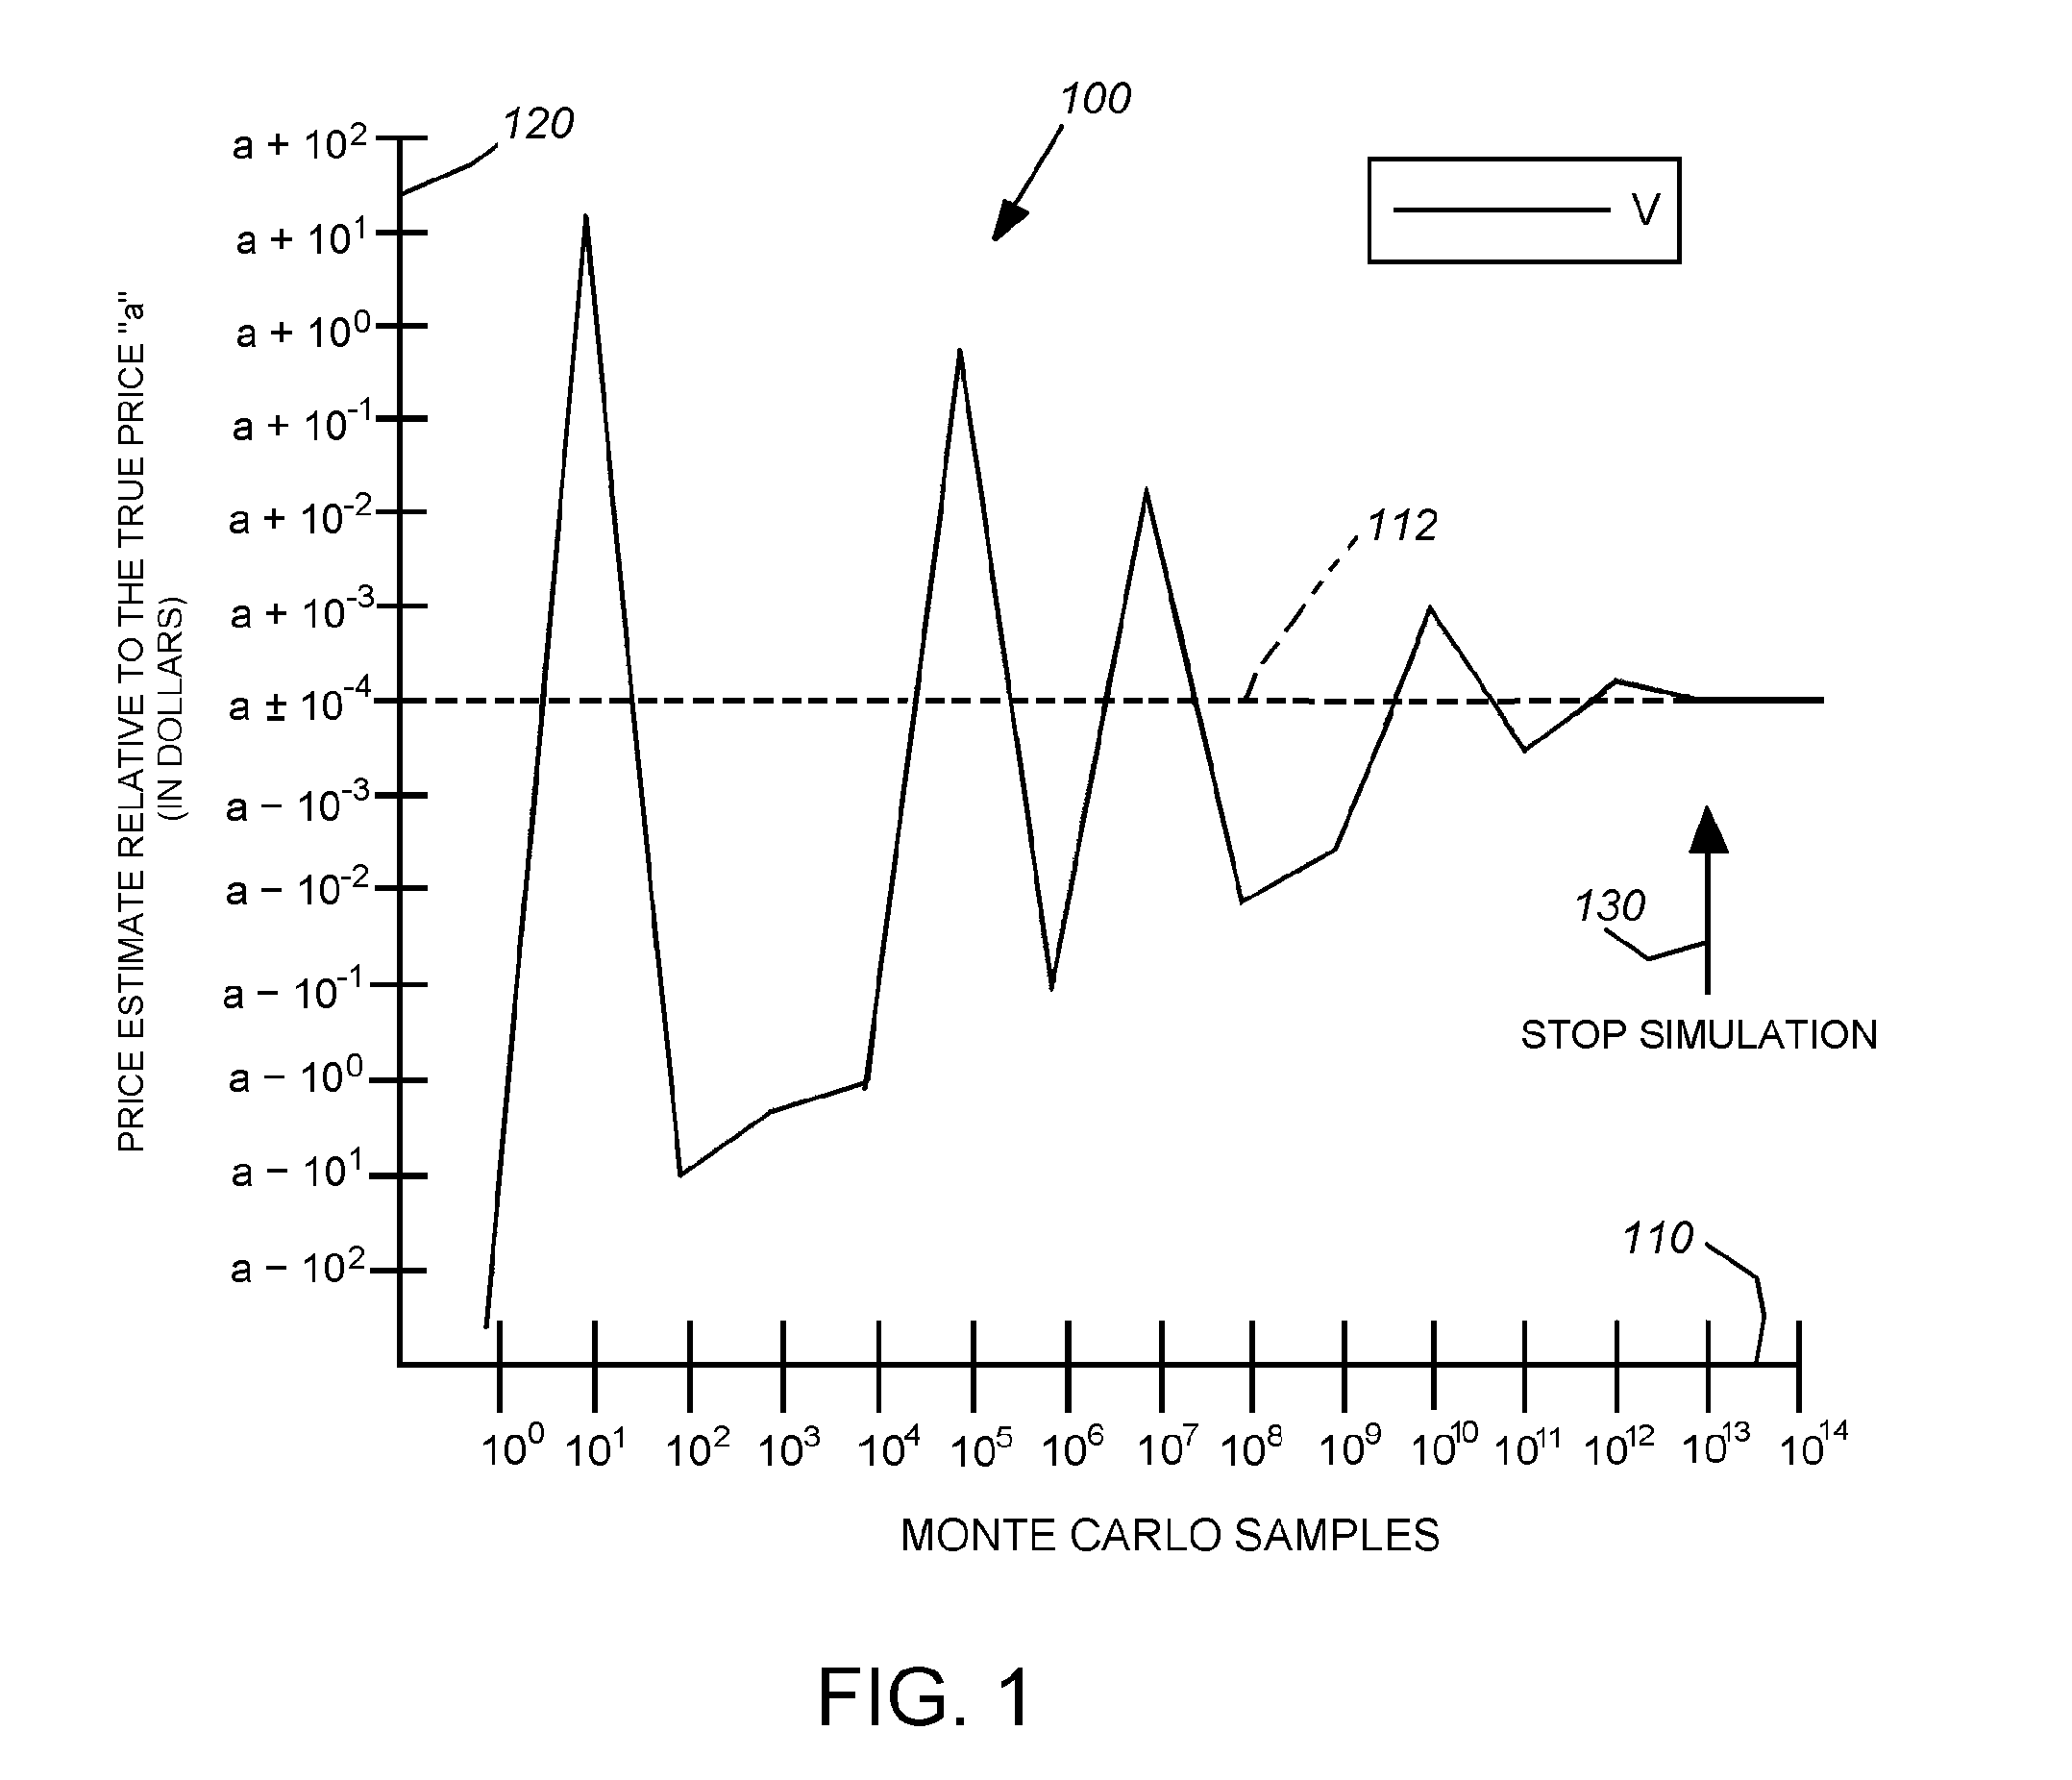 System and method for achieving improved accuracy from efficient computer architectures